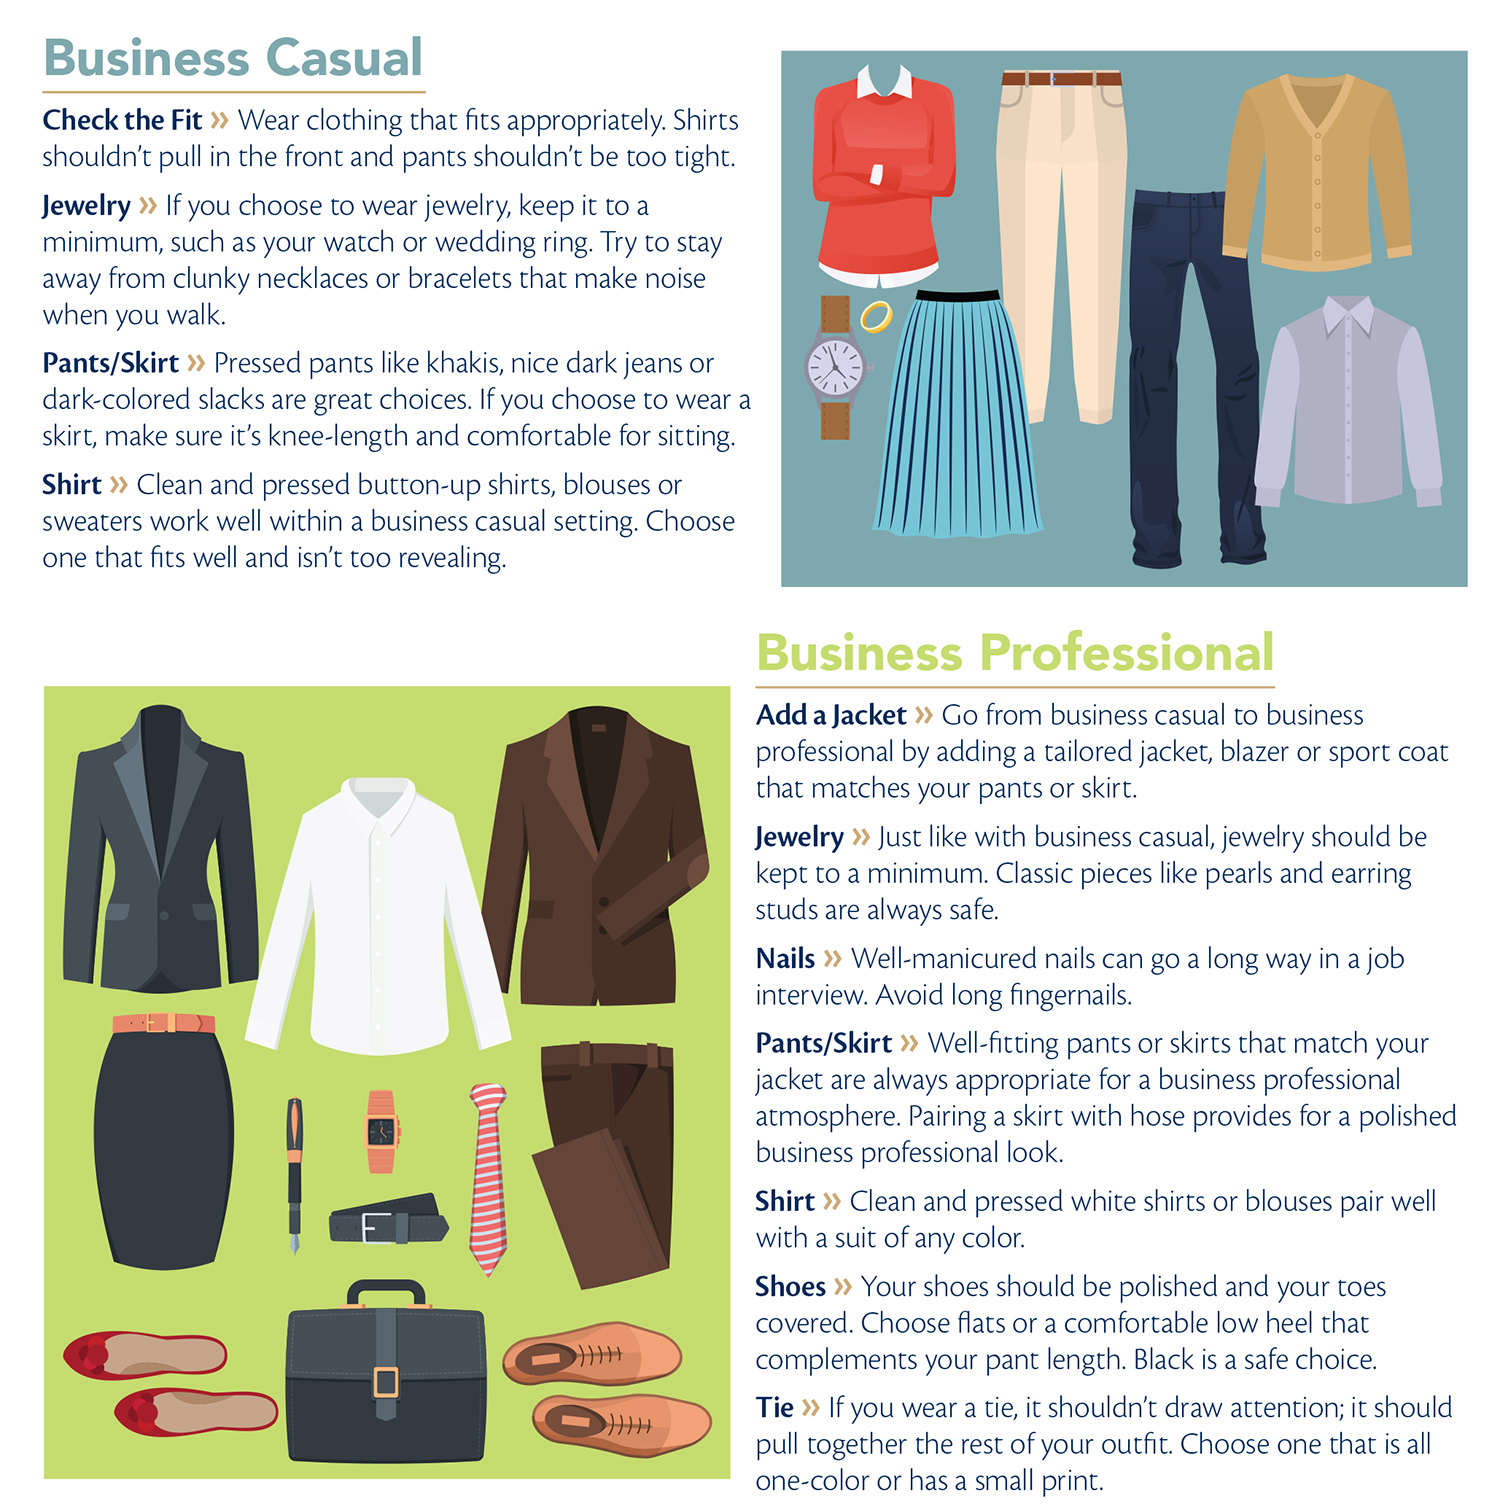 Business Casual vs. Formal Suits: When to Wear What